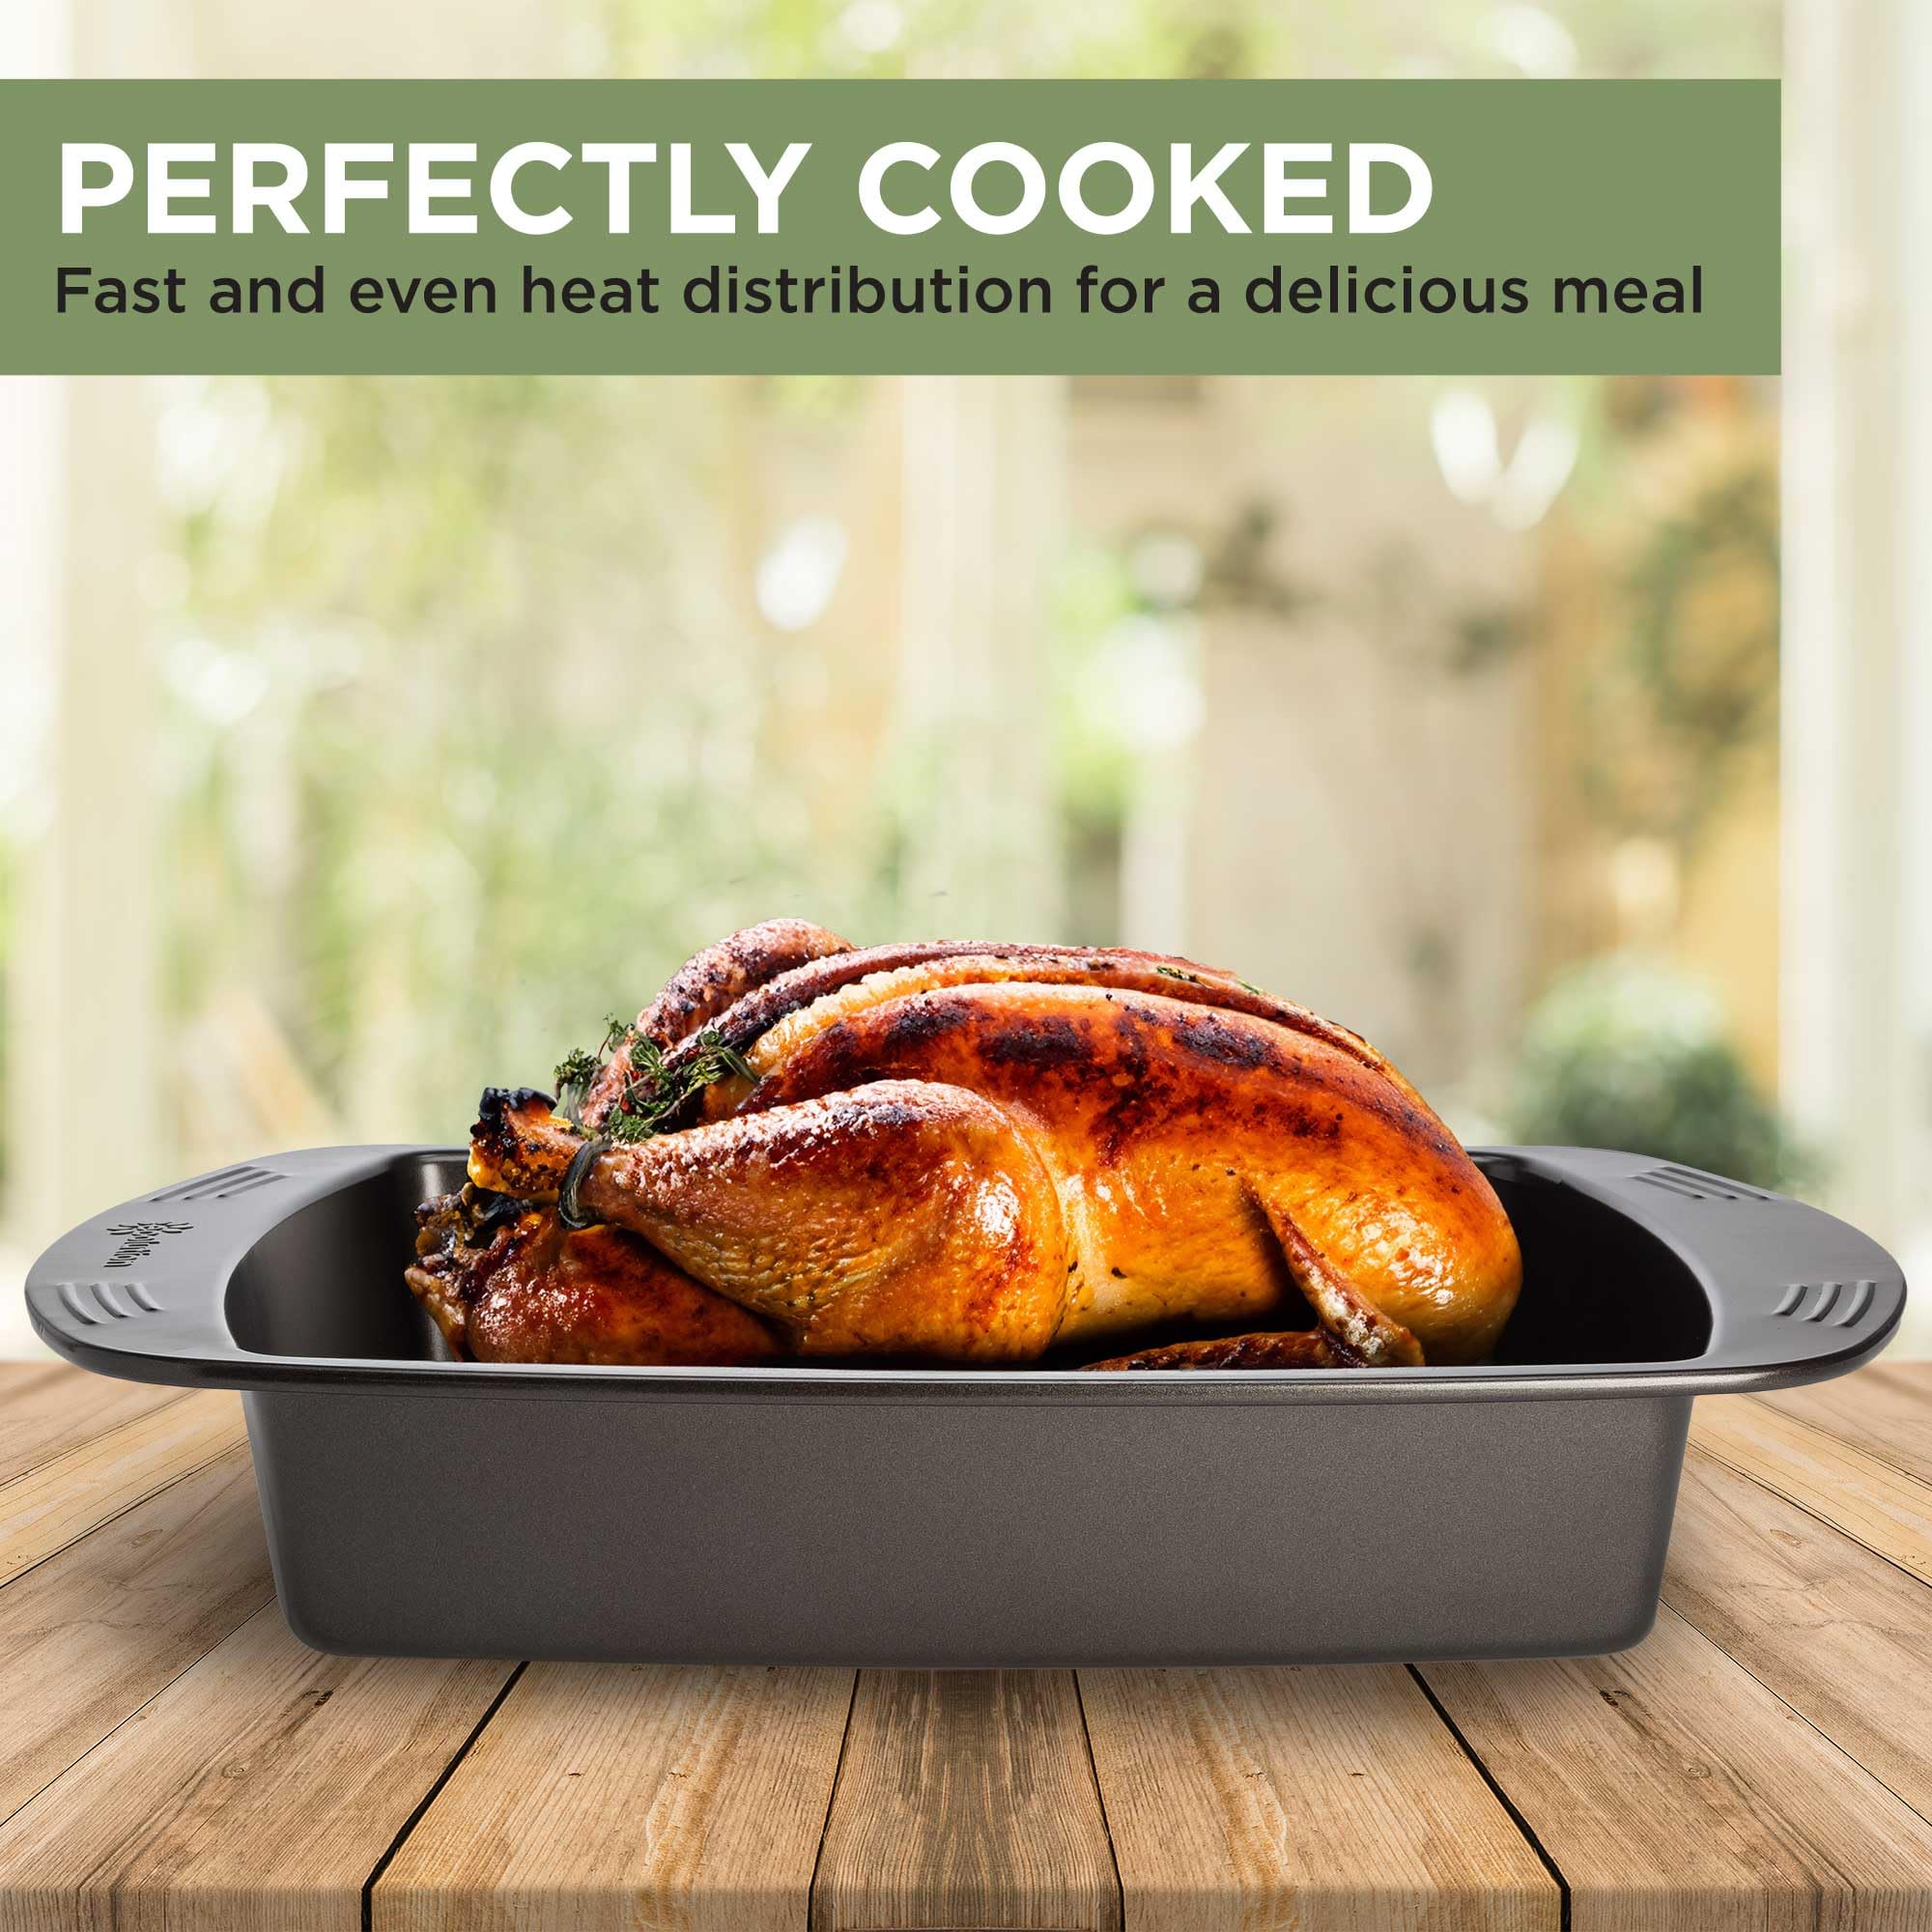 Ecolution Nonstick Roasting Pan, Carbon Steel with Premium Nonstick, Oven Safe to 450 F, Made without PFOA, Dishwasher Safe, 16-Inch x 12.75-Inch Interior, 21-Inch x 14-Inch Exterior